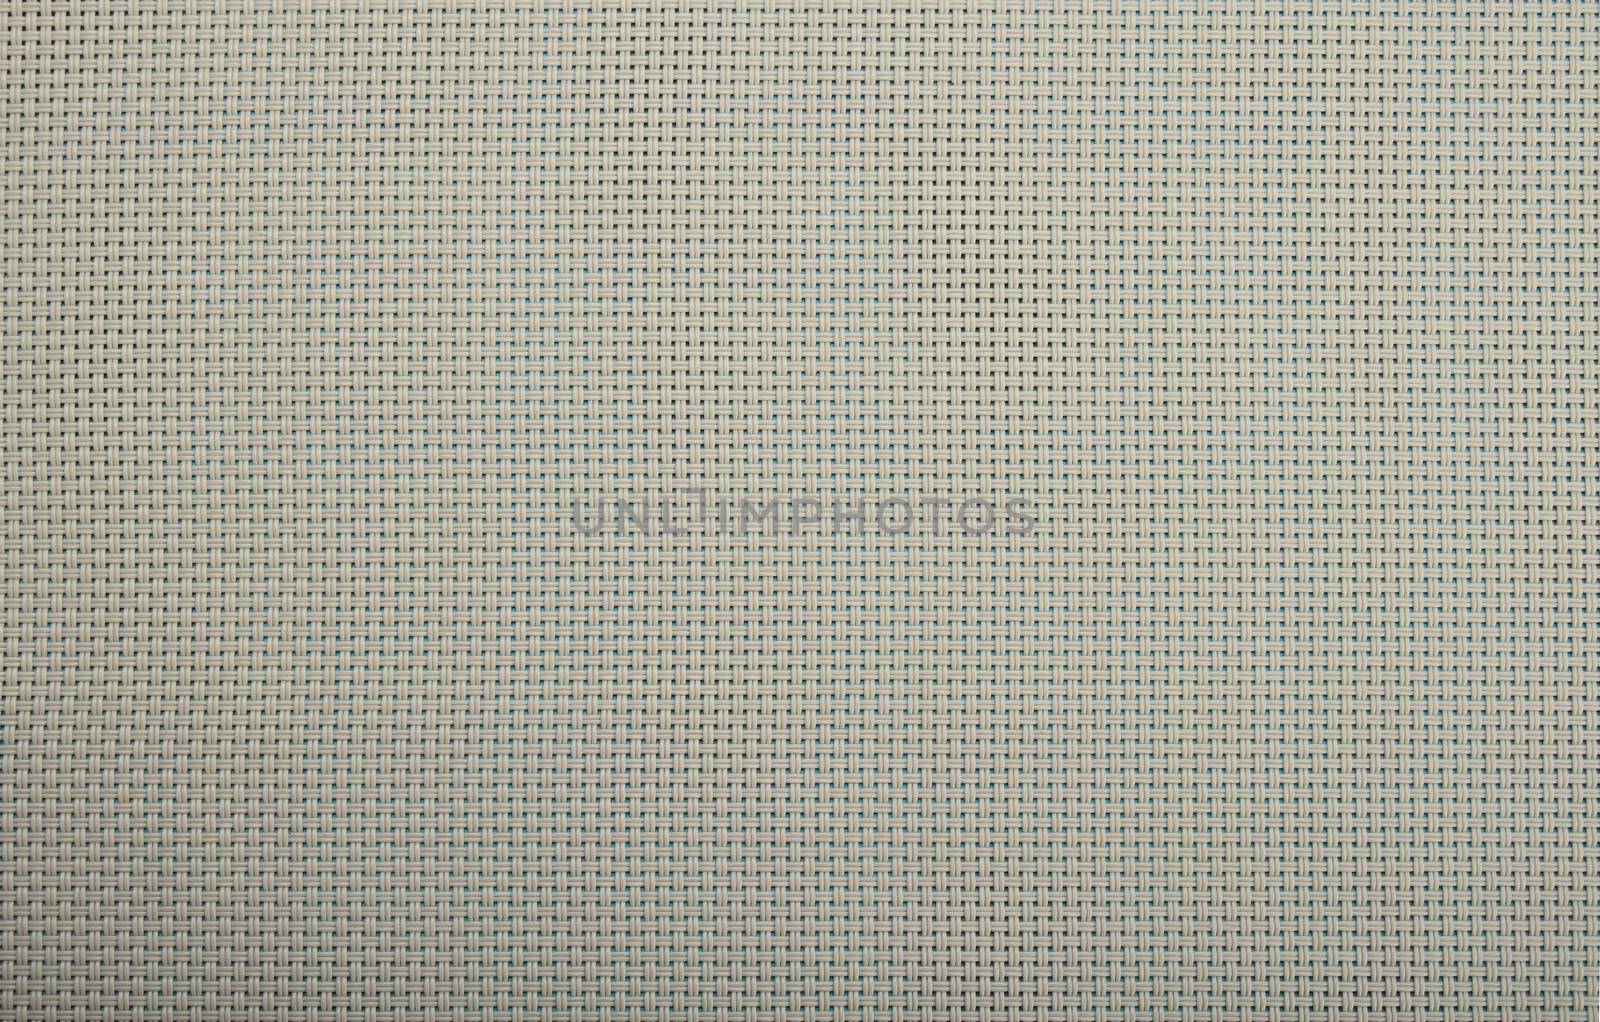 Background texture of grey wicker braided plastic double strings by BreakingTheWalls